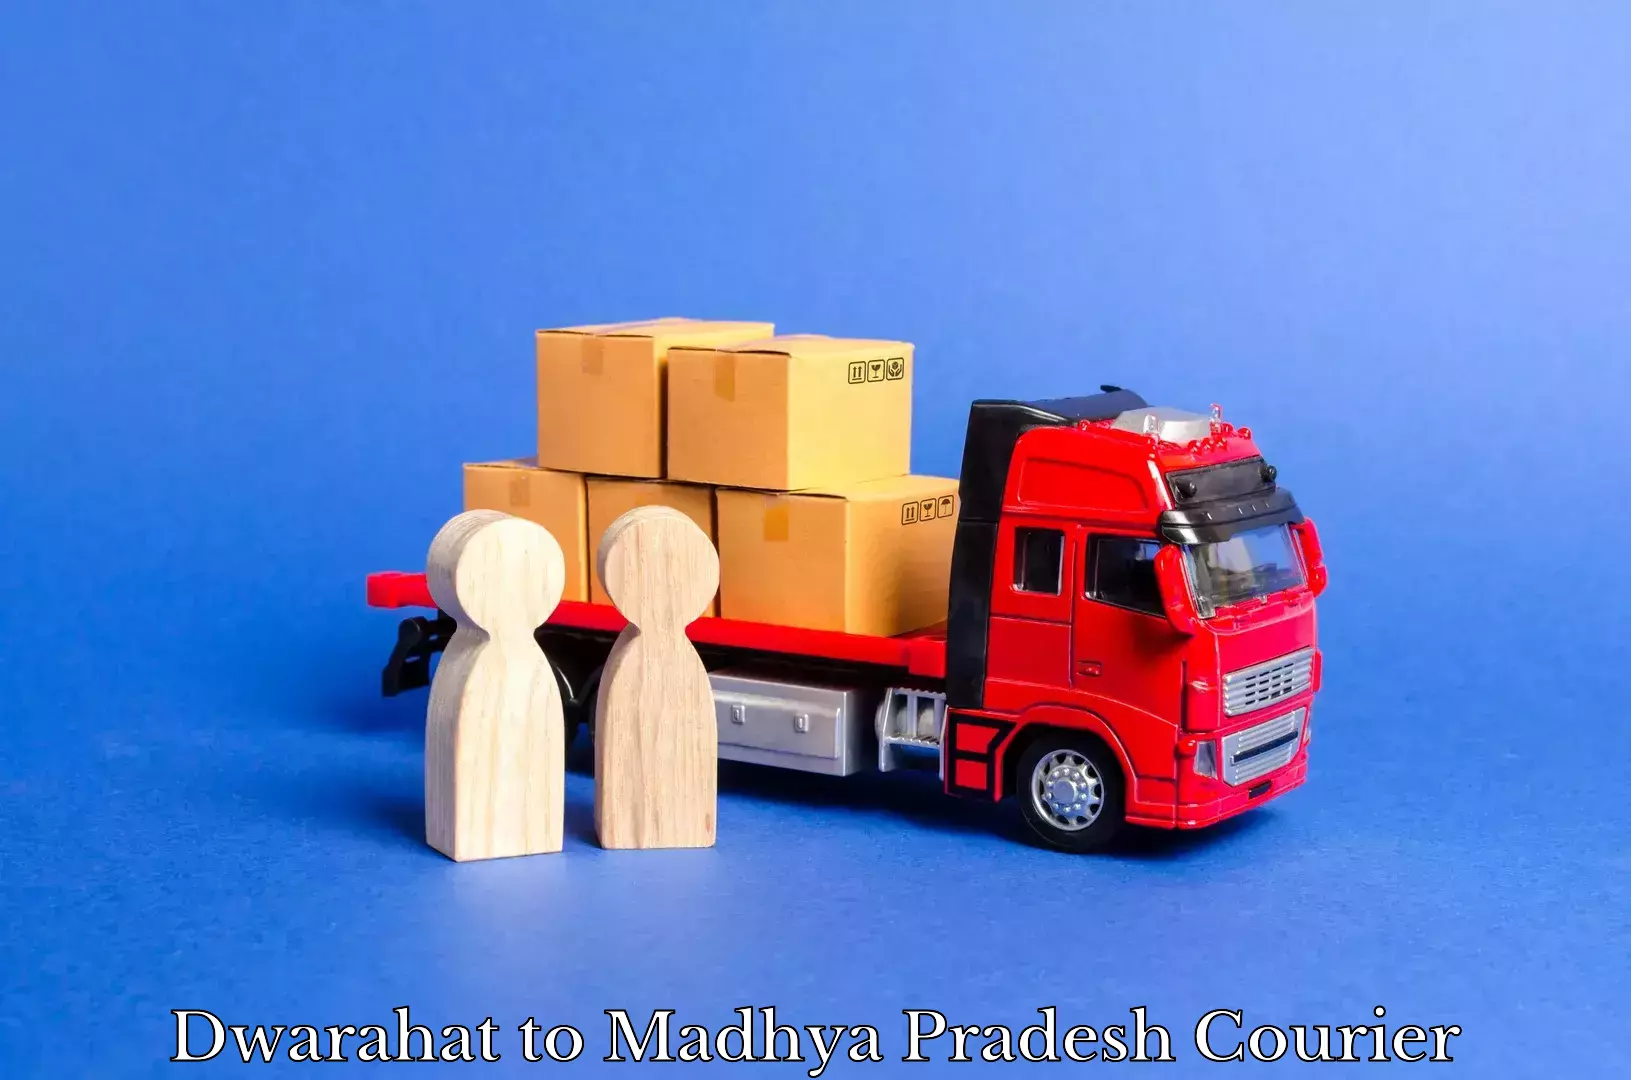 Large package courier Dwarahat to Madhya Pradesh